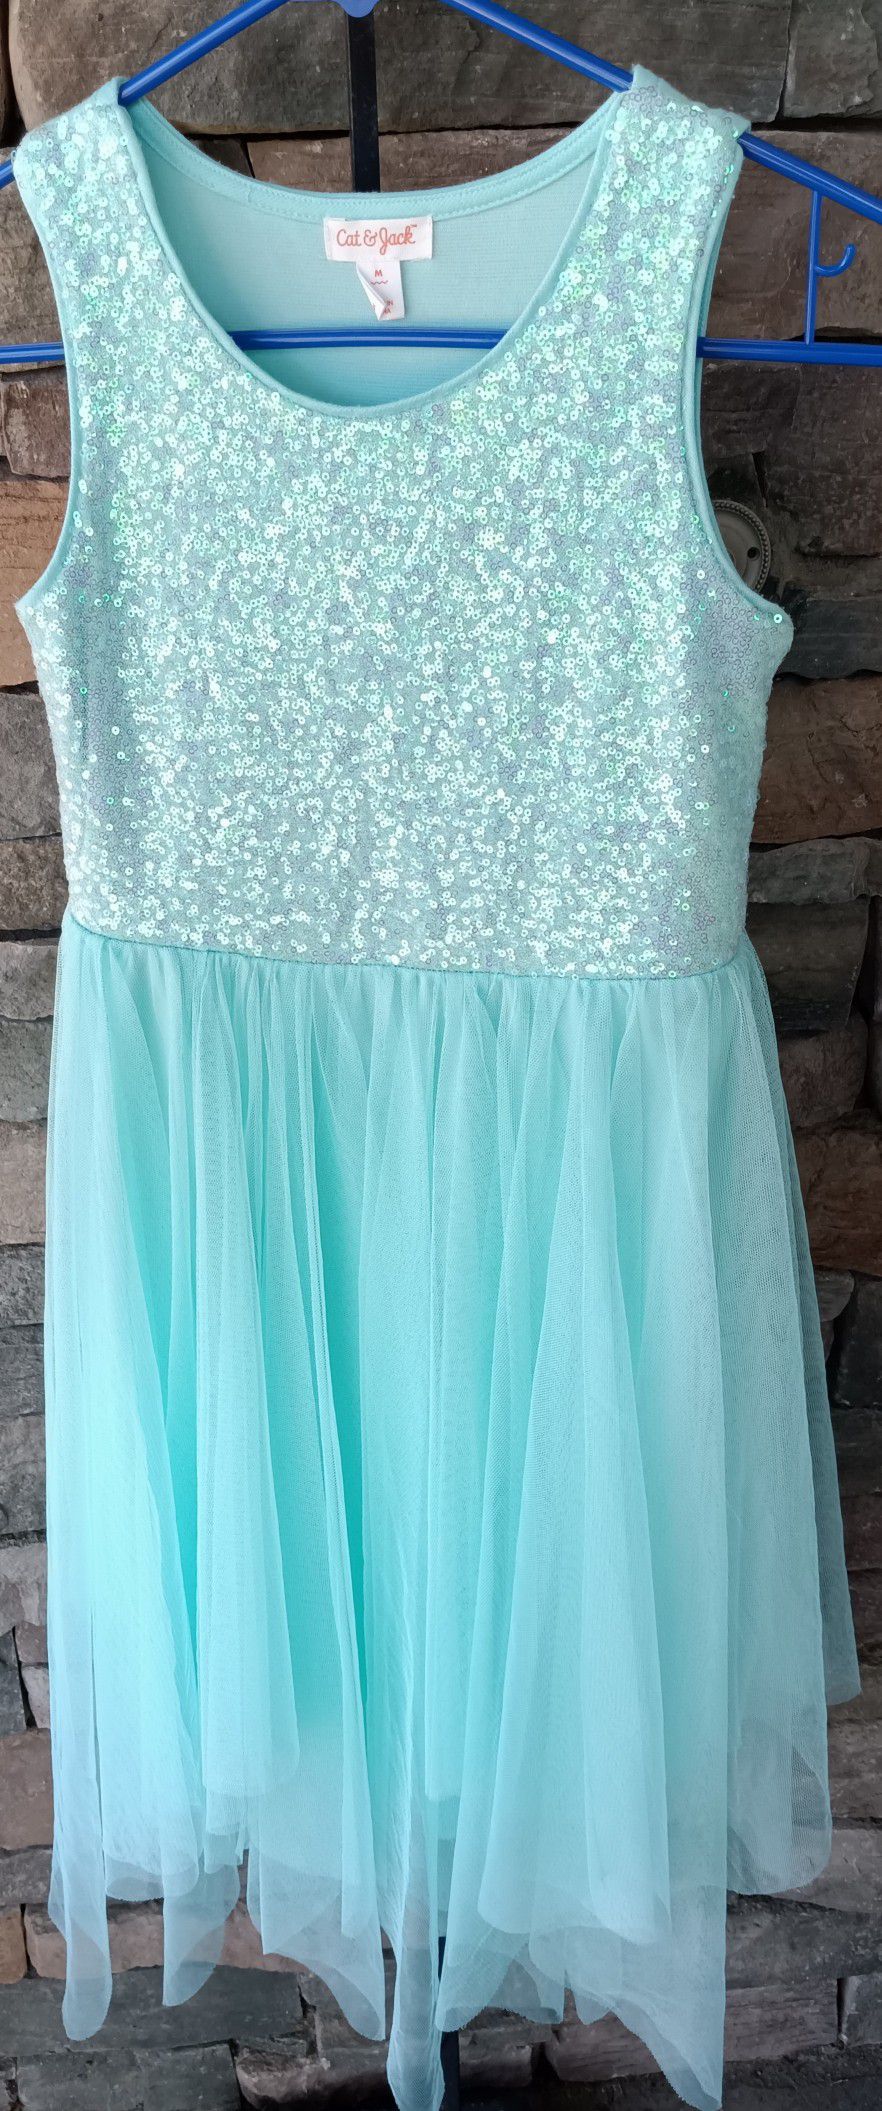 💖 CAT & JACK, Beautiful, Sparkly, Pastel 💖 Sequin & Full Tulle 💖 Party Dress with Asymmetrical Hemline! 🌼 Size: Medium (Approximately Size 8)